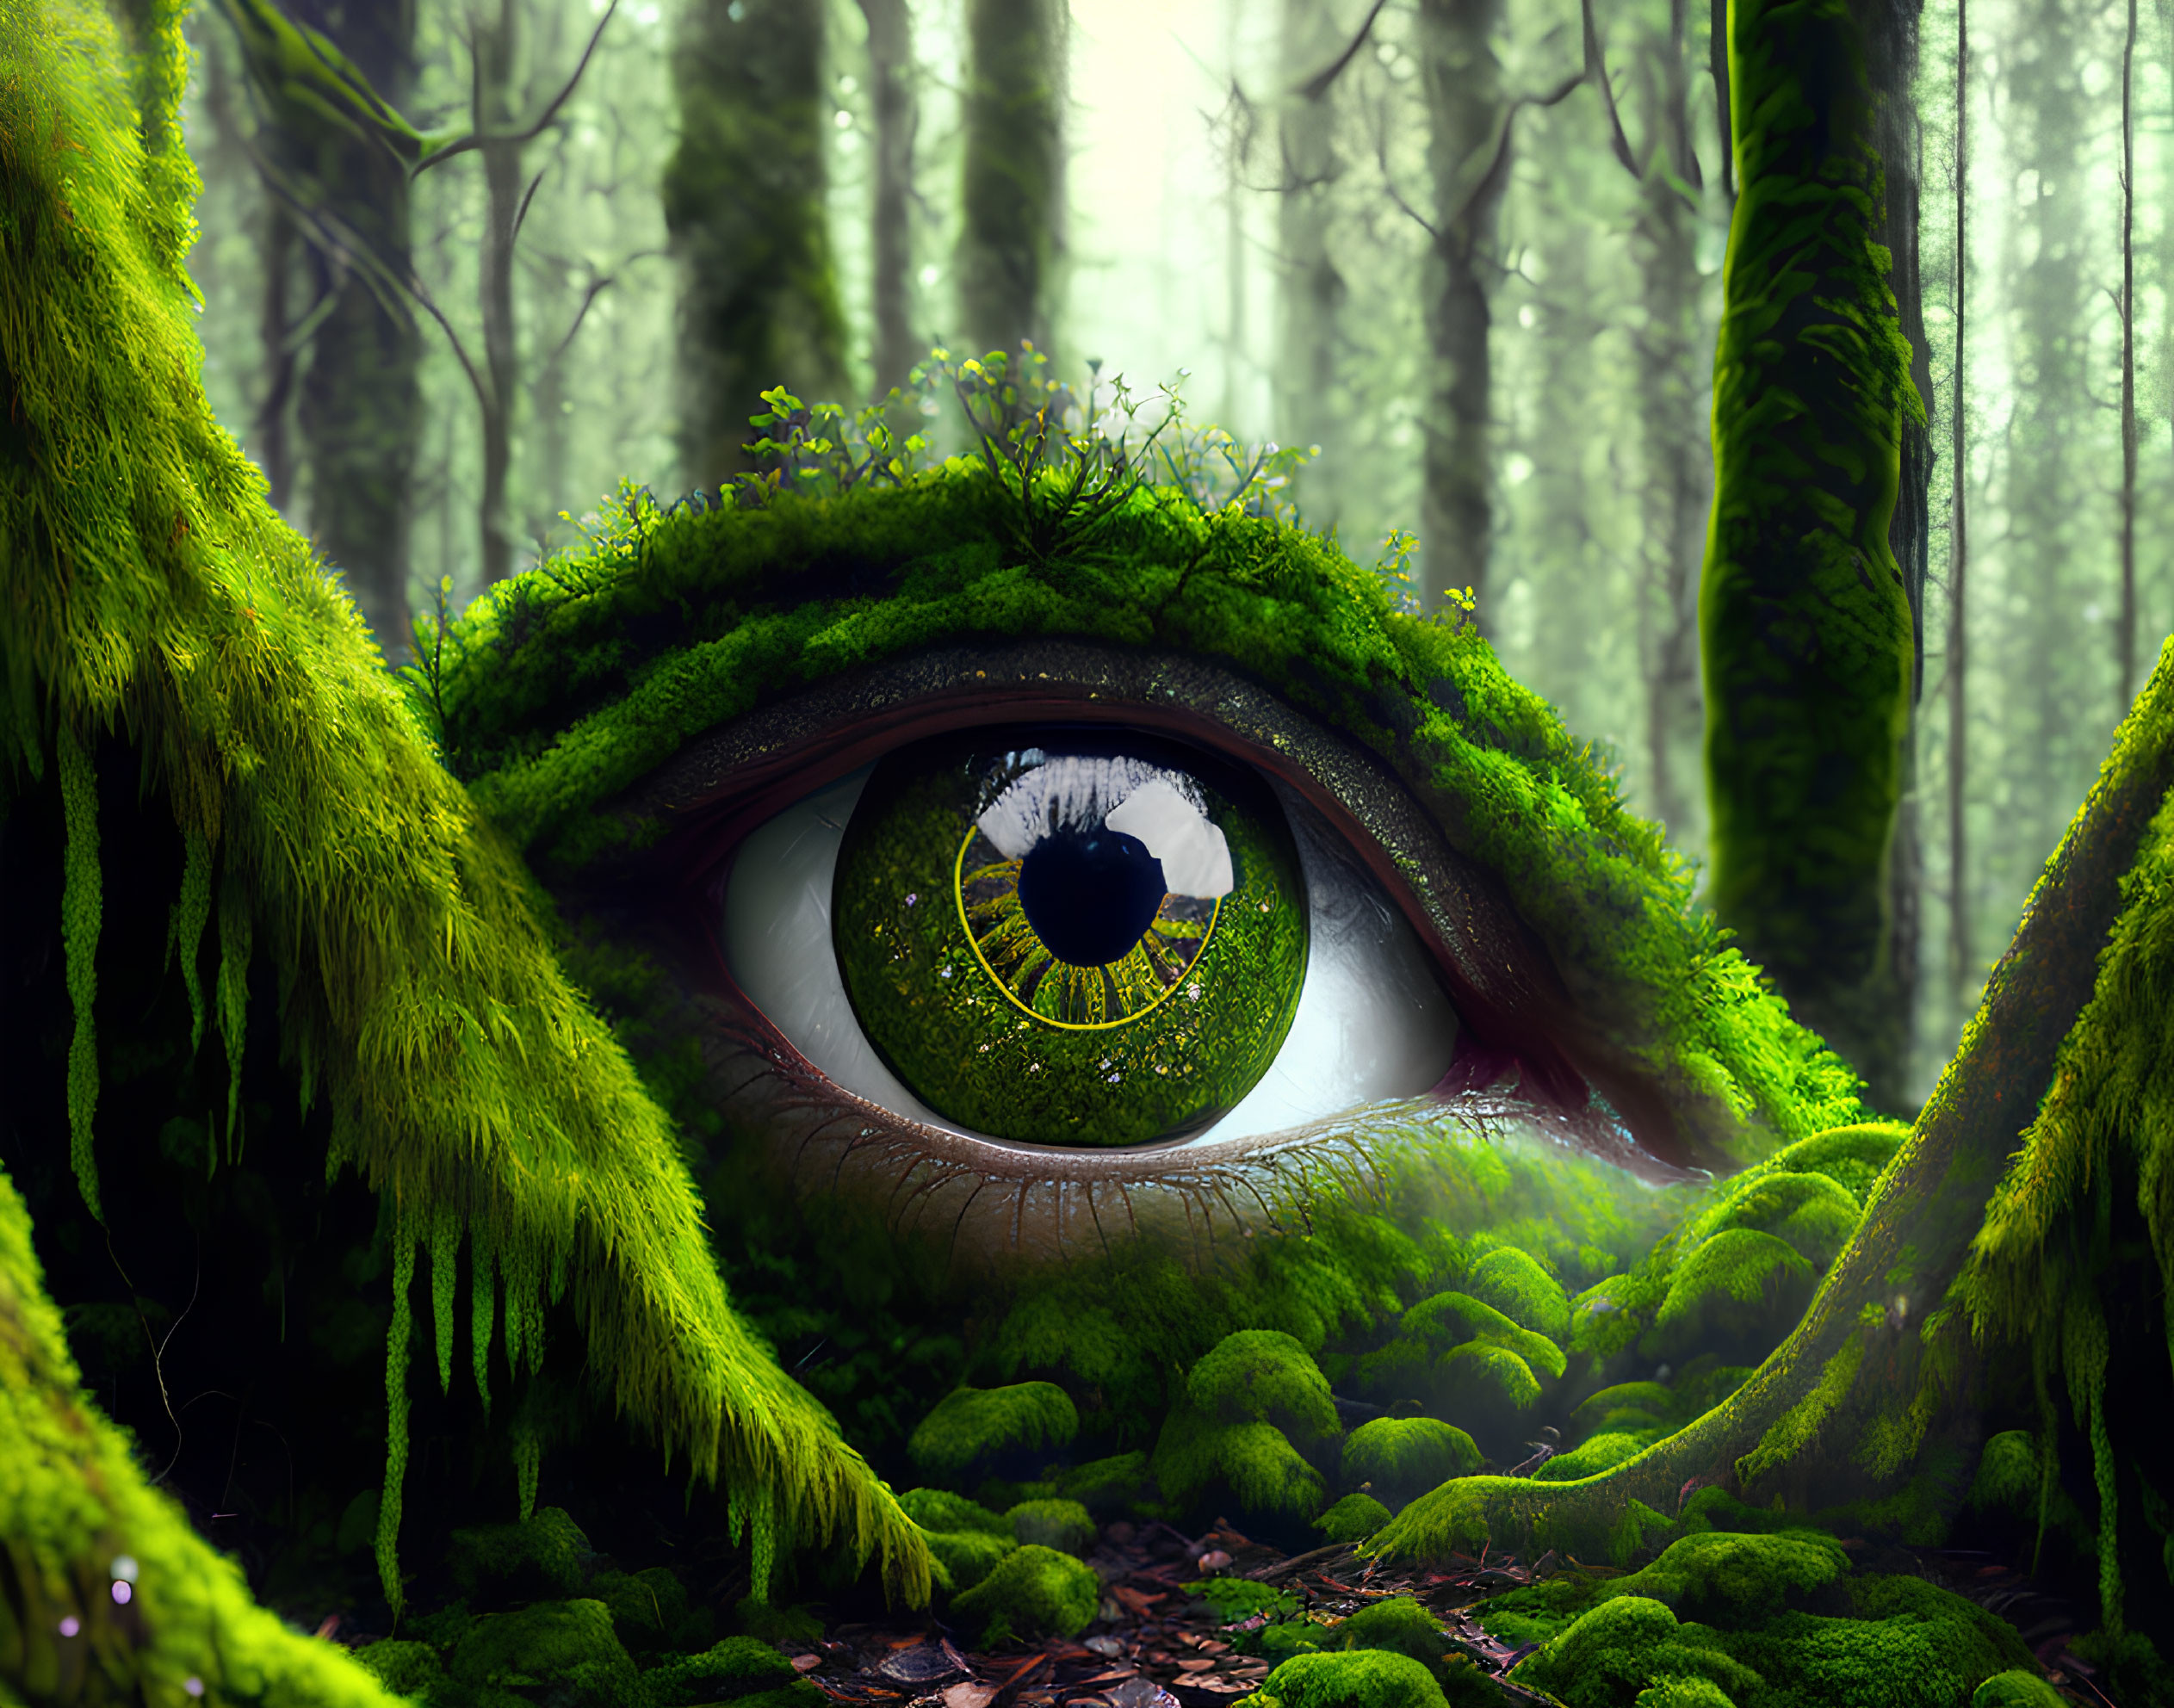 Giant Eye in Forest Setting with Moss-Covered Trees